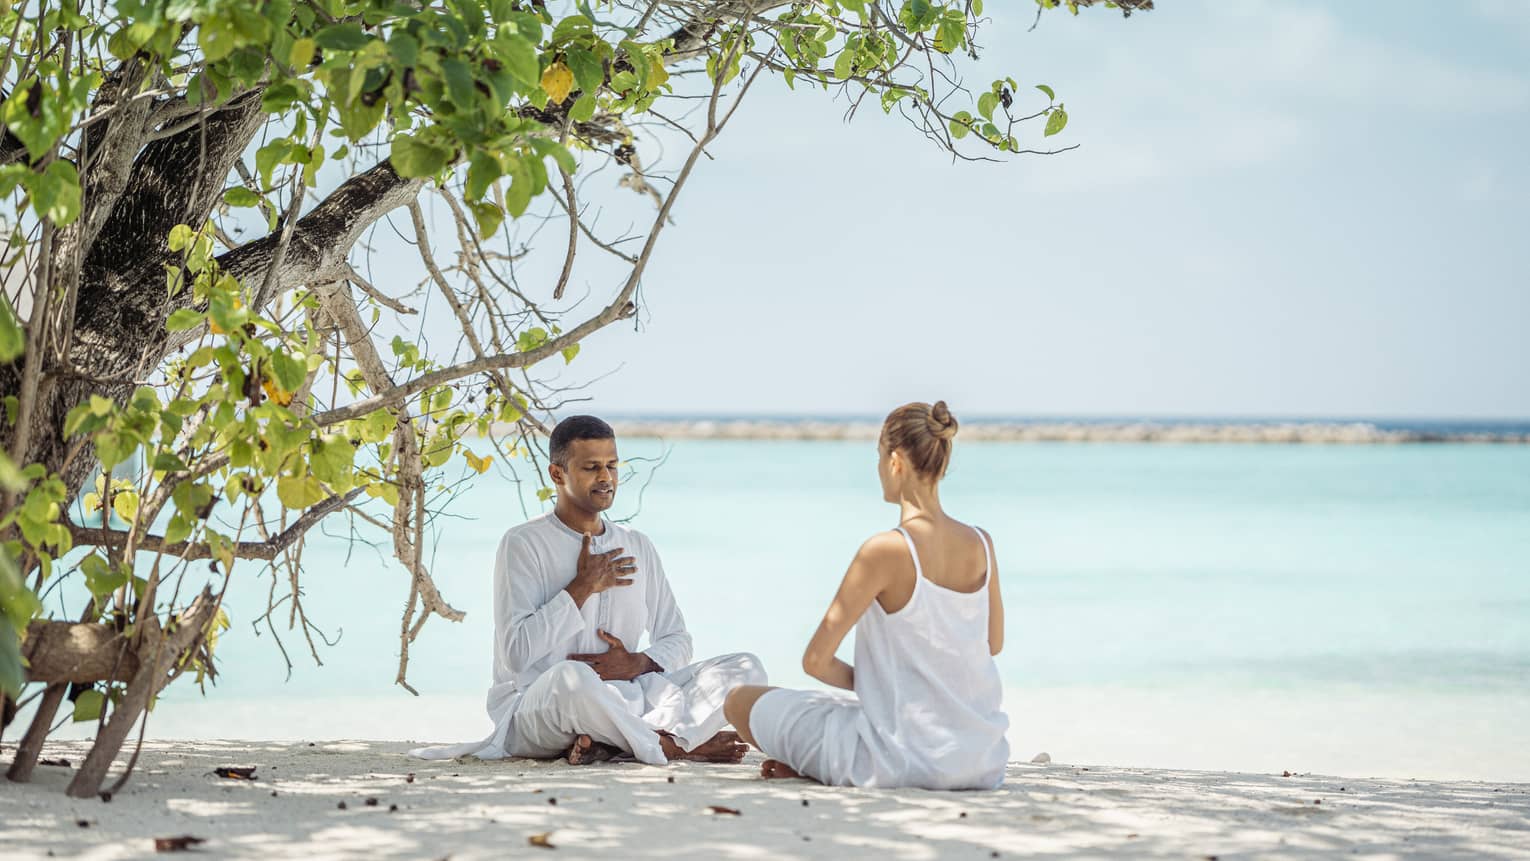 Dr. Arun K. Tomson practises breathing exercises with female guest on the beach under the shade of a tree